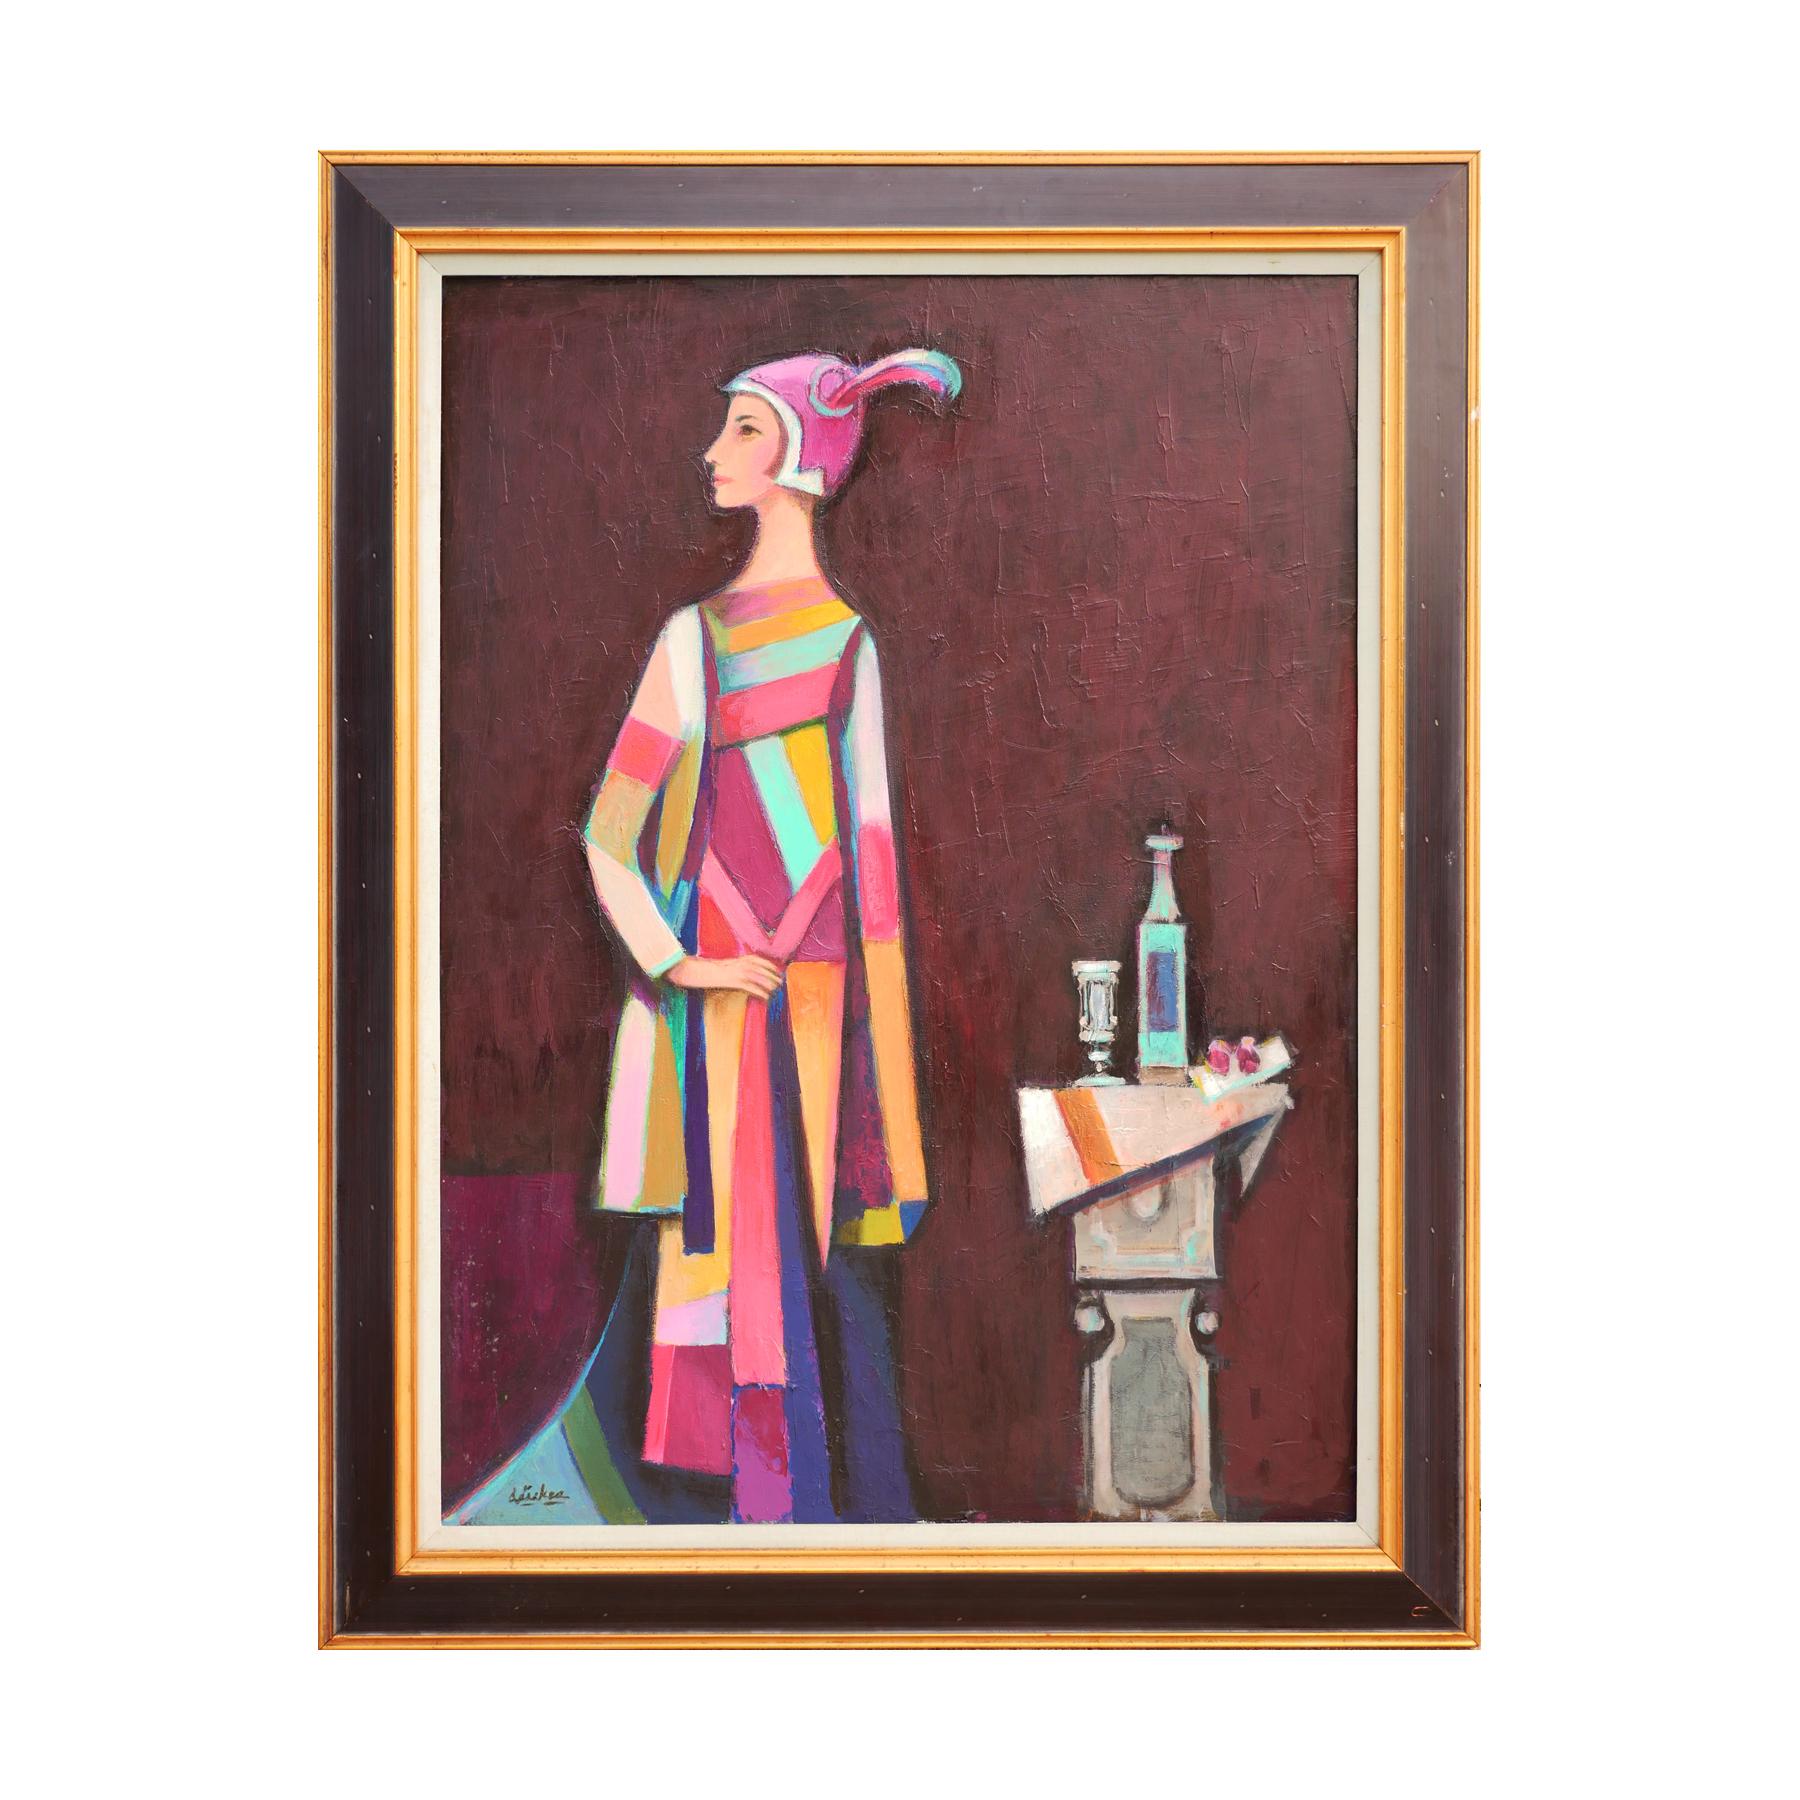 Modern abstract figurative portrait painting by Houston, TX artist David Adickes. The work features a woman wearing a brightly colored patterned dress and hat posed next to a still life arrangement set against a neutral toned maroon background.